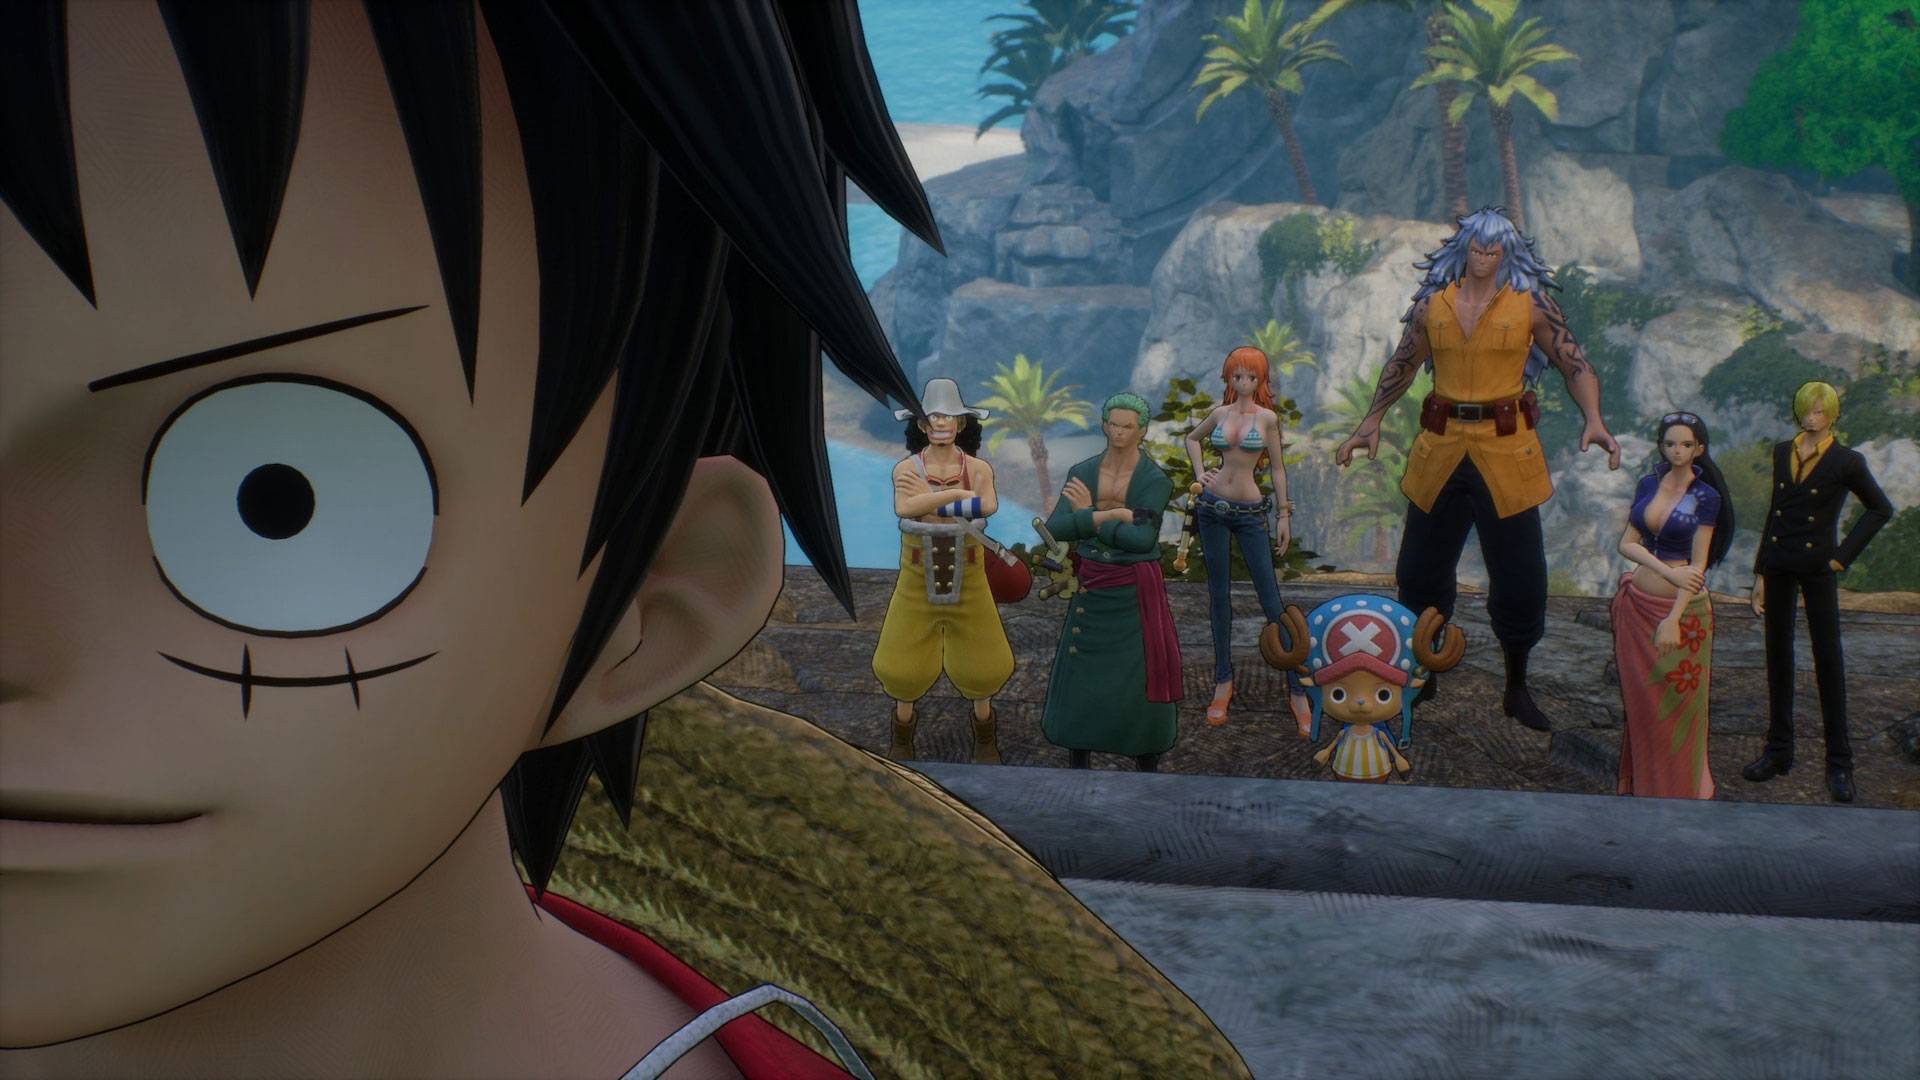 One Piece Odyssey Review(PlayStation 5, PlayStation 4, Xbox Series X